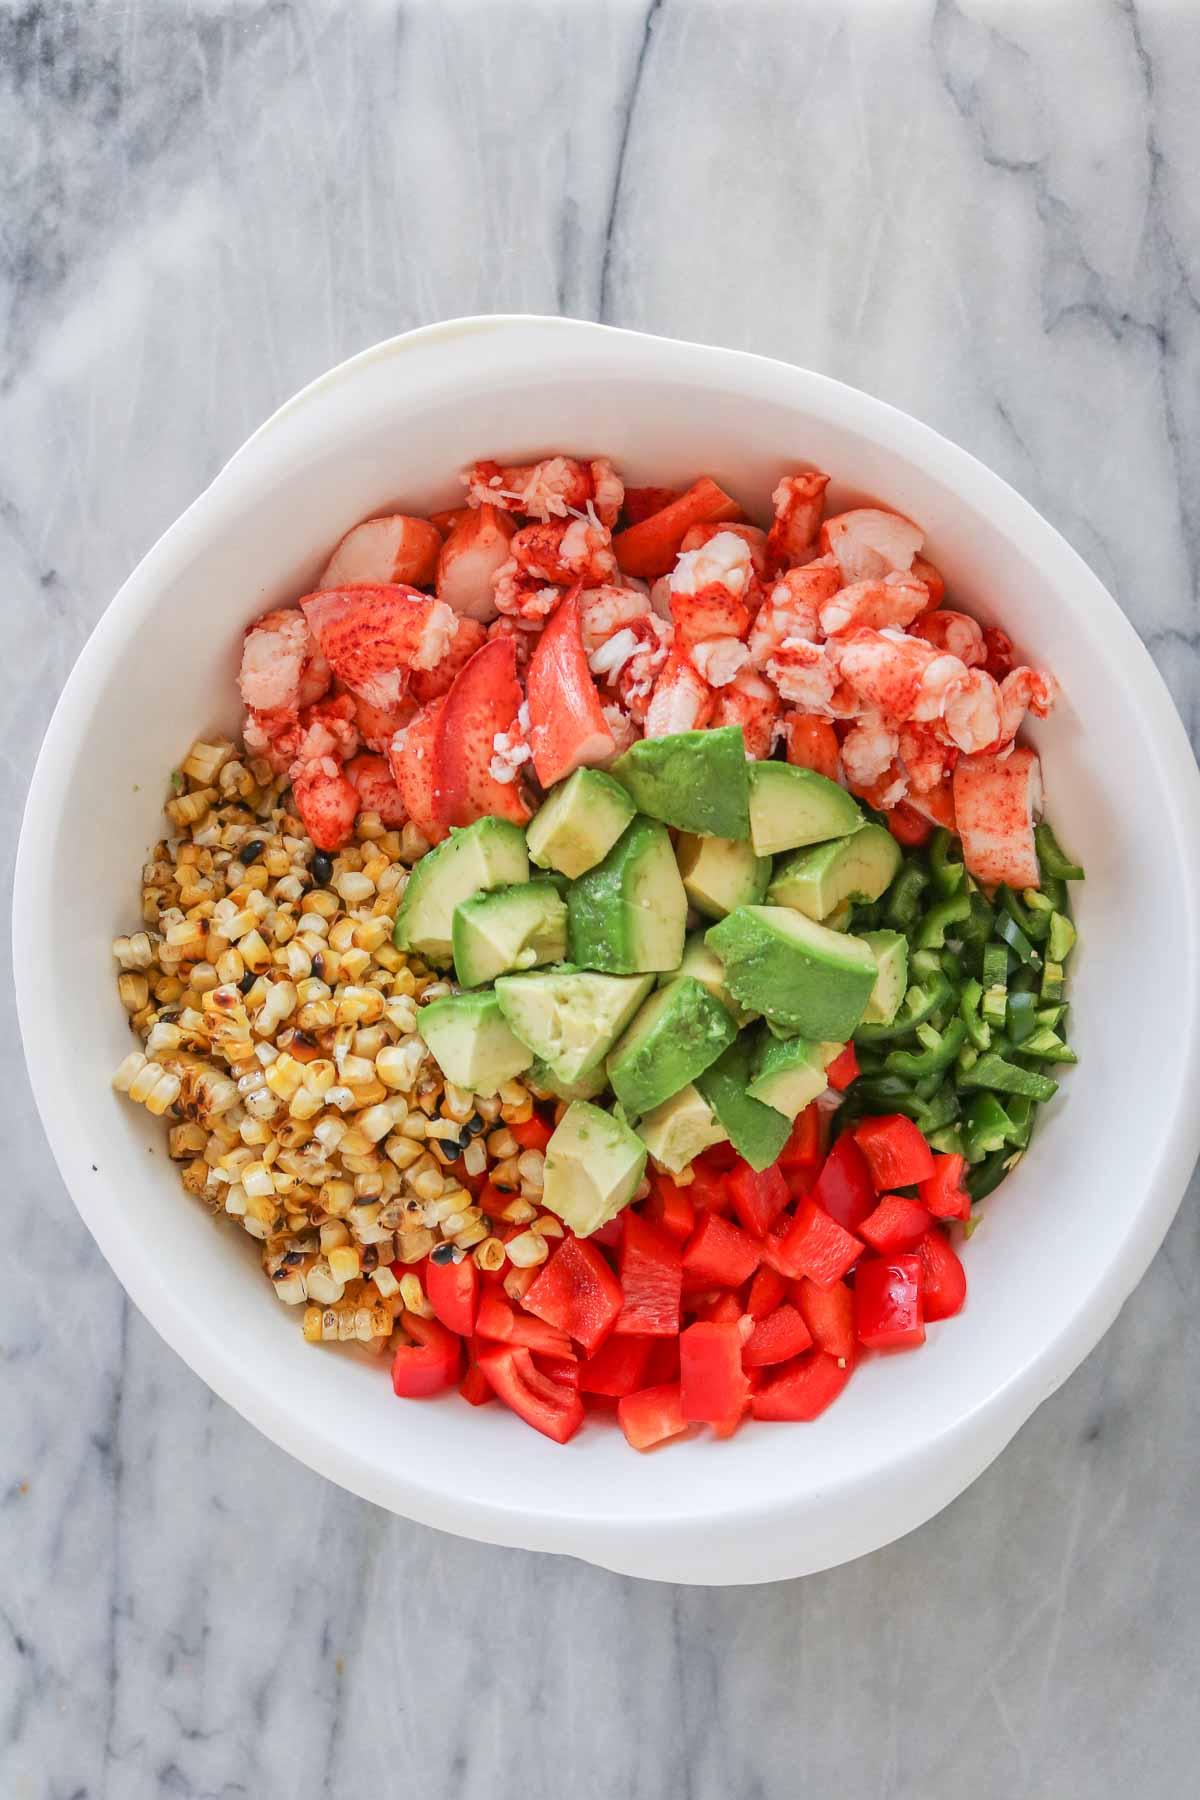 Lobster pasta salad ingredients in a mixing bowl before being mixed together.